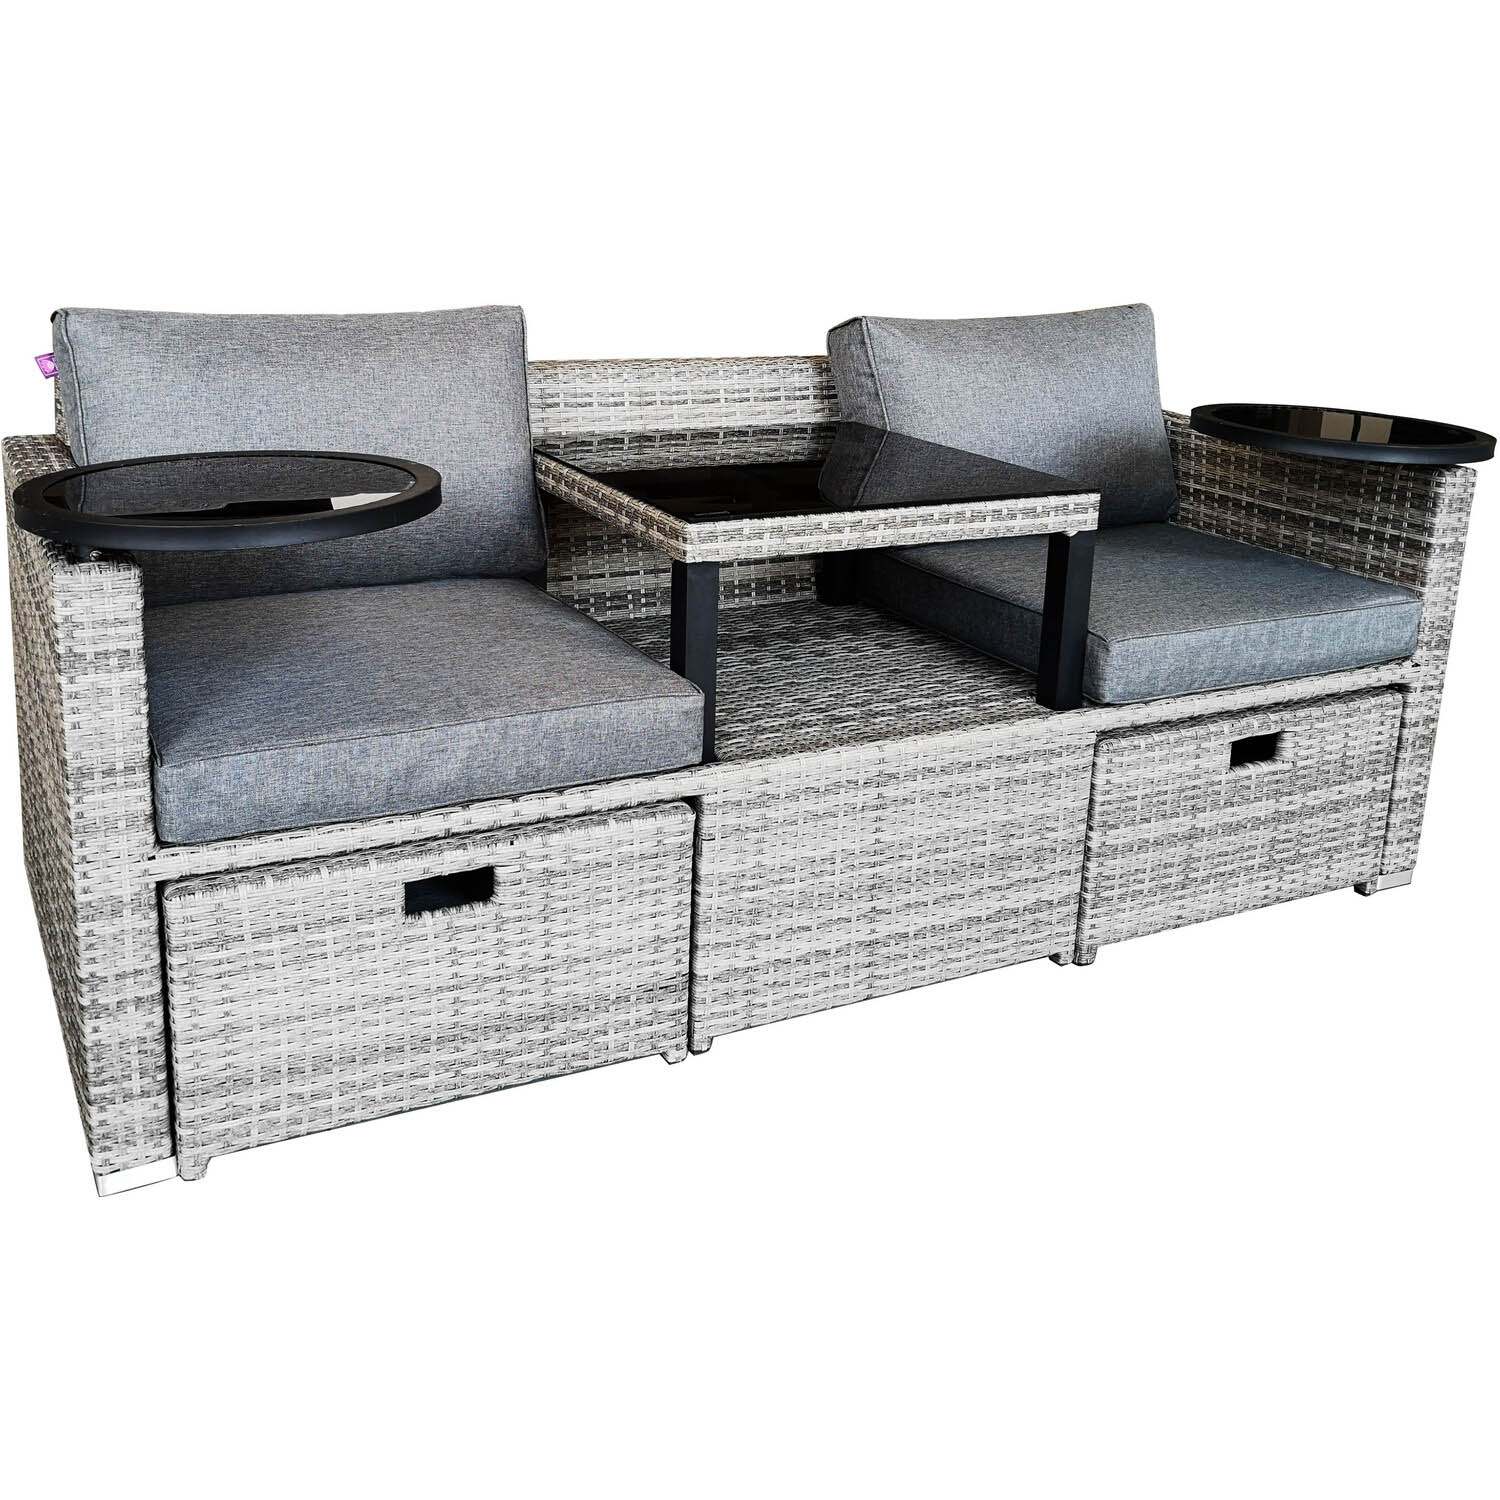 Malay Deluxe Malay New Hampshire 2 Seater Natural Transformer Patio Set Image 11